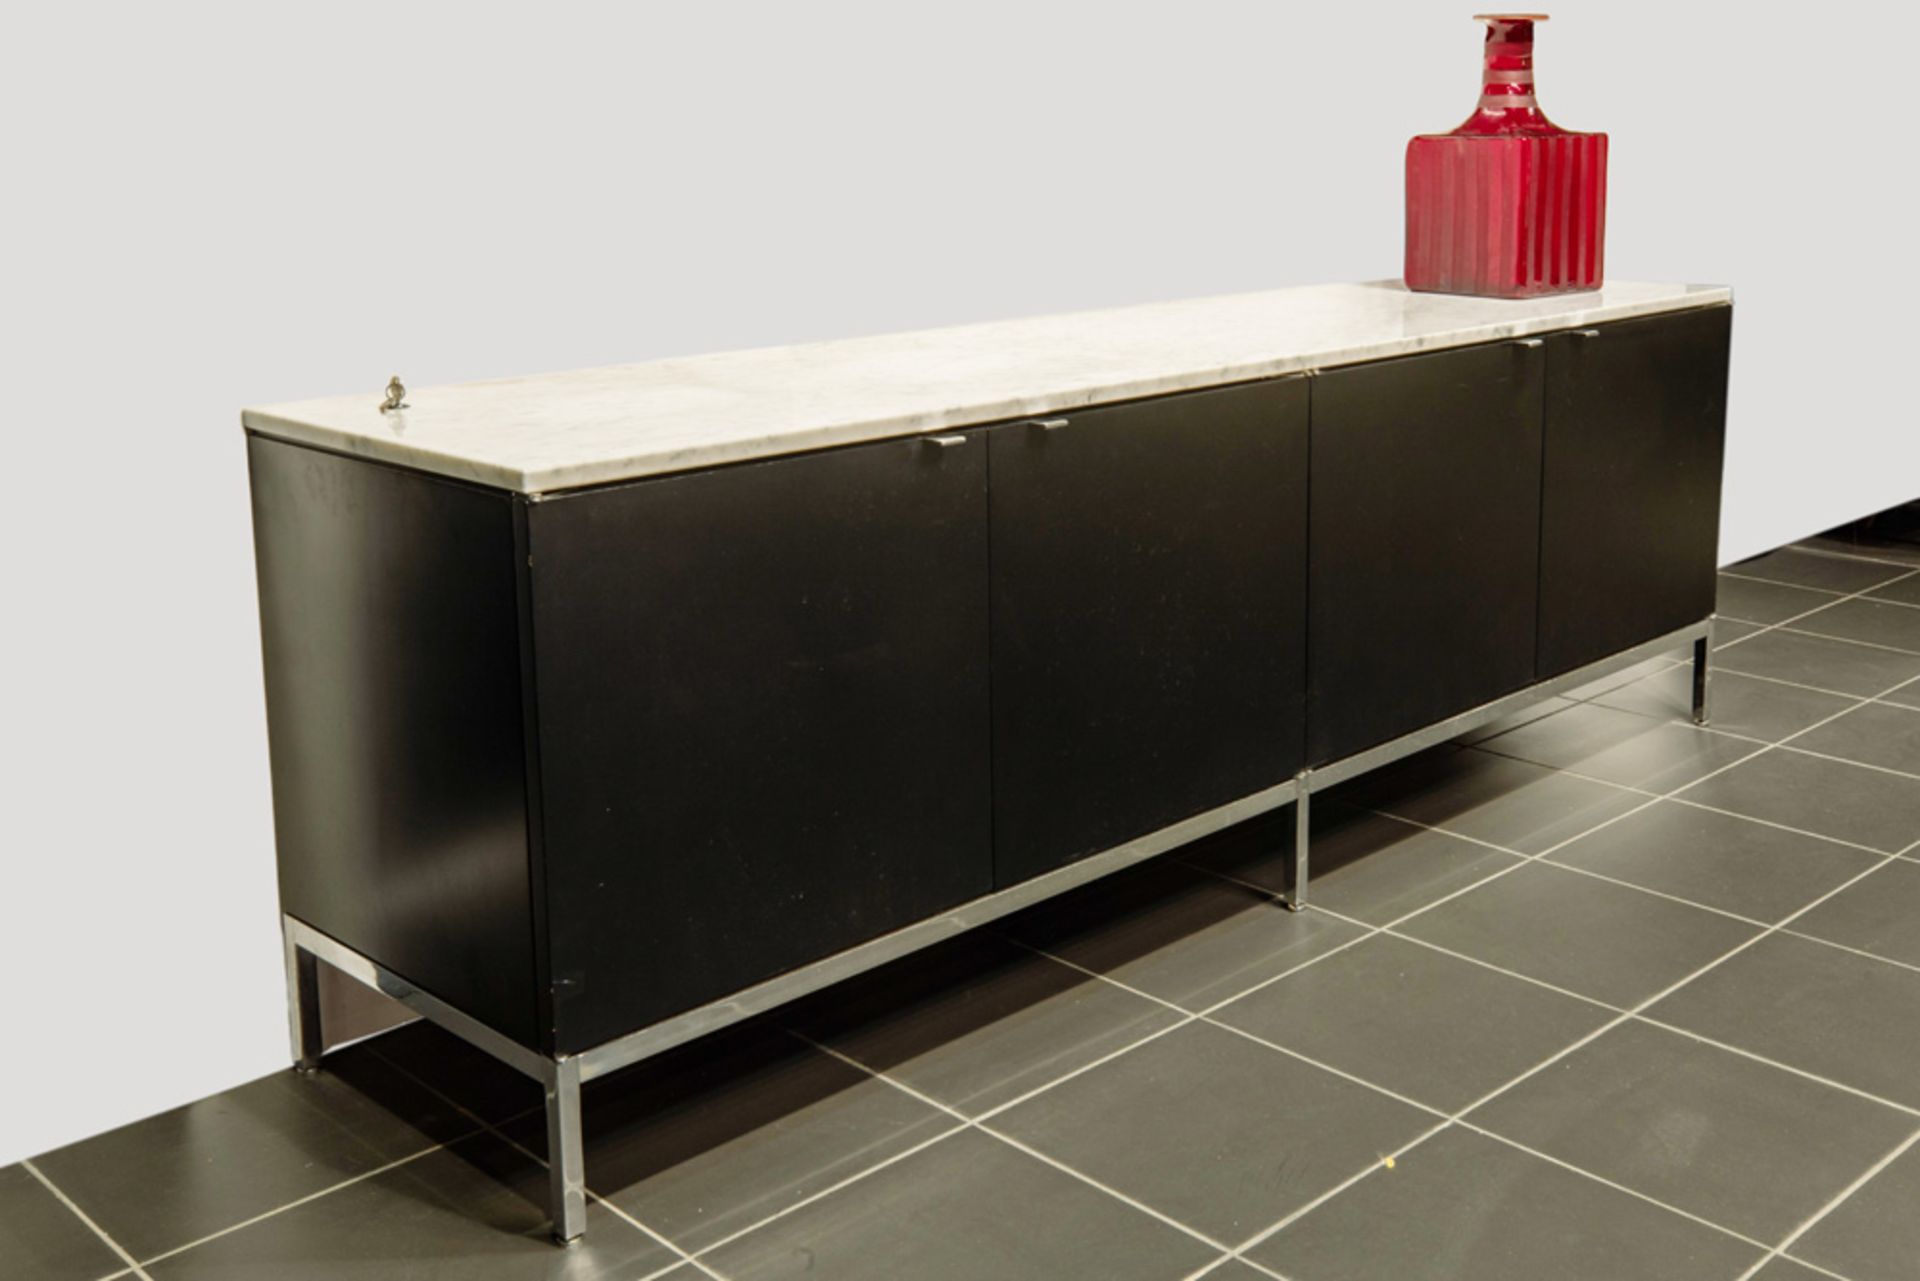 sixties' Florence Knoll design (n° 118 dd 1961) "Knoll International" marked "Credenza" sideboard in - Bild 3 aus 4